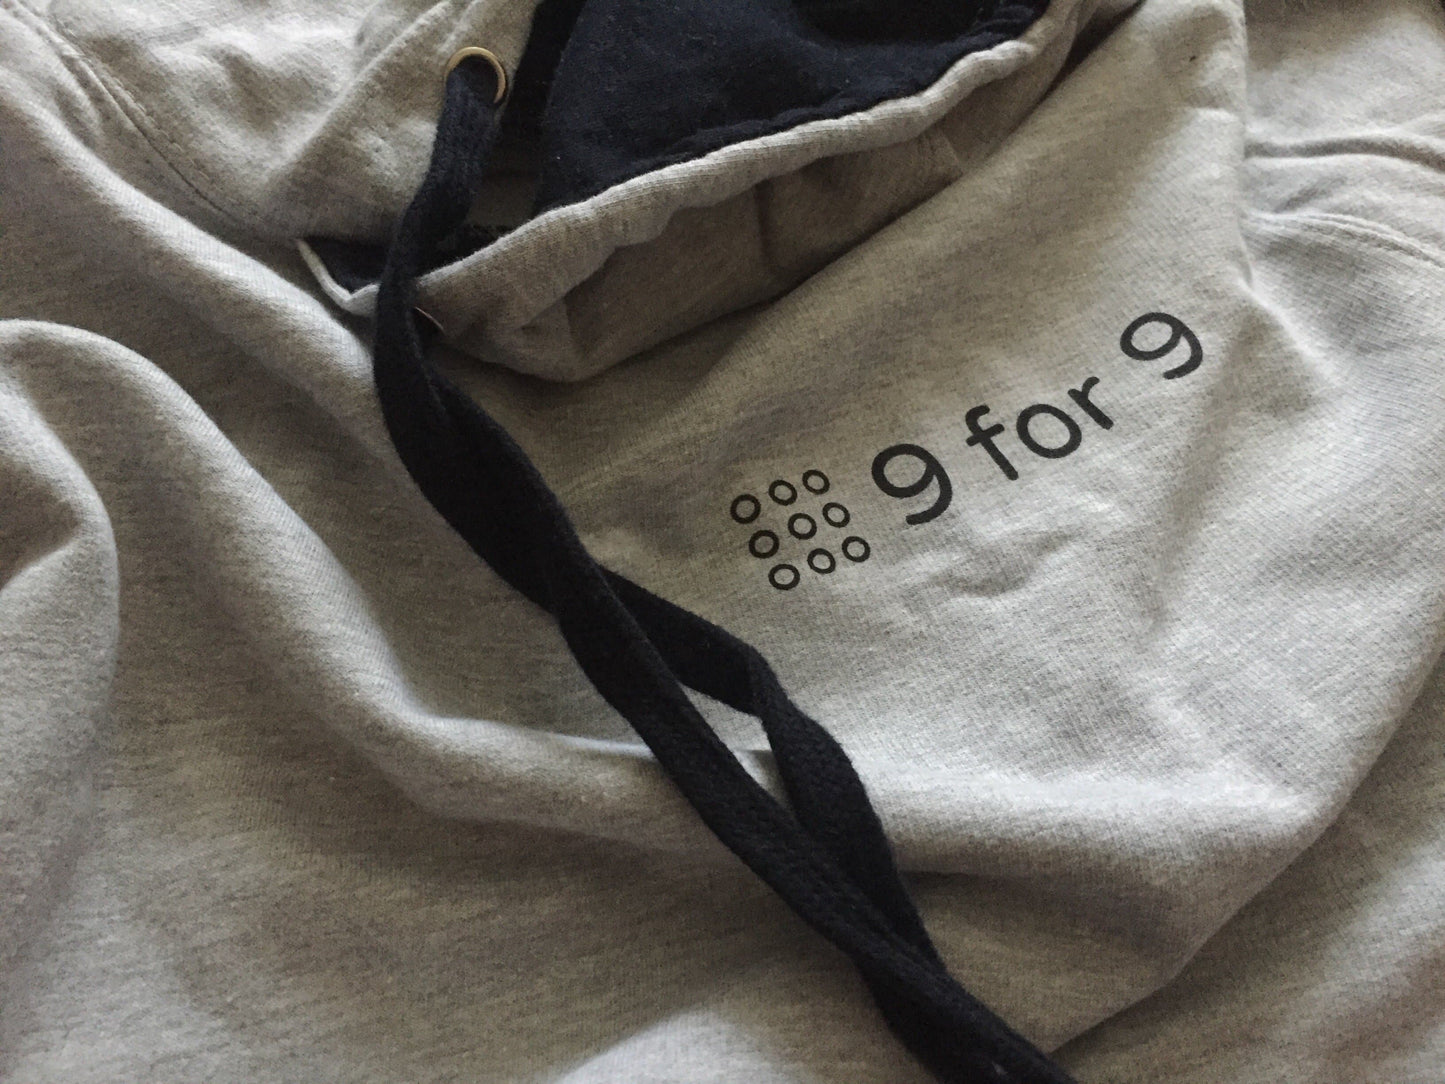 9 for 9 Hoodie (Unisex) - 9 for 9